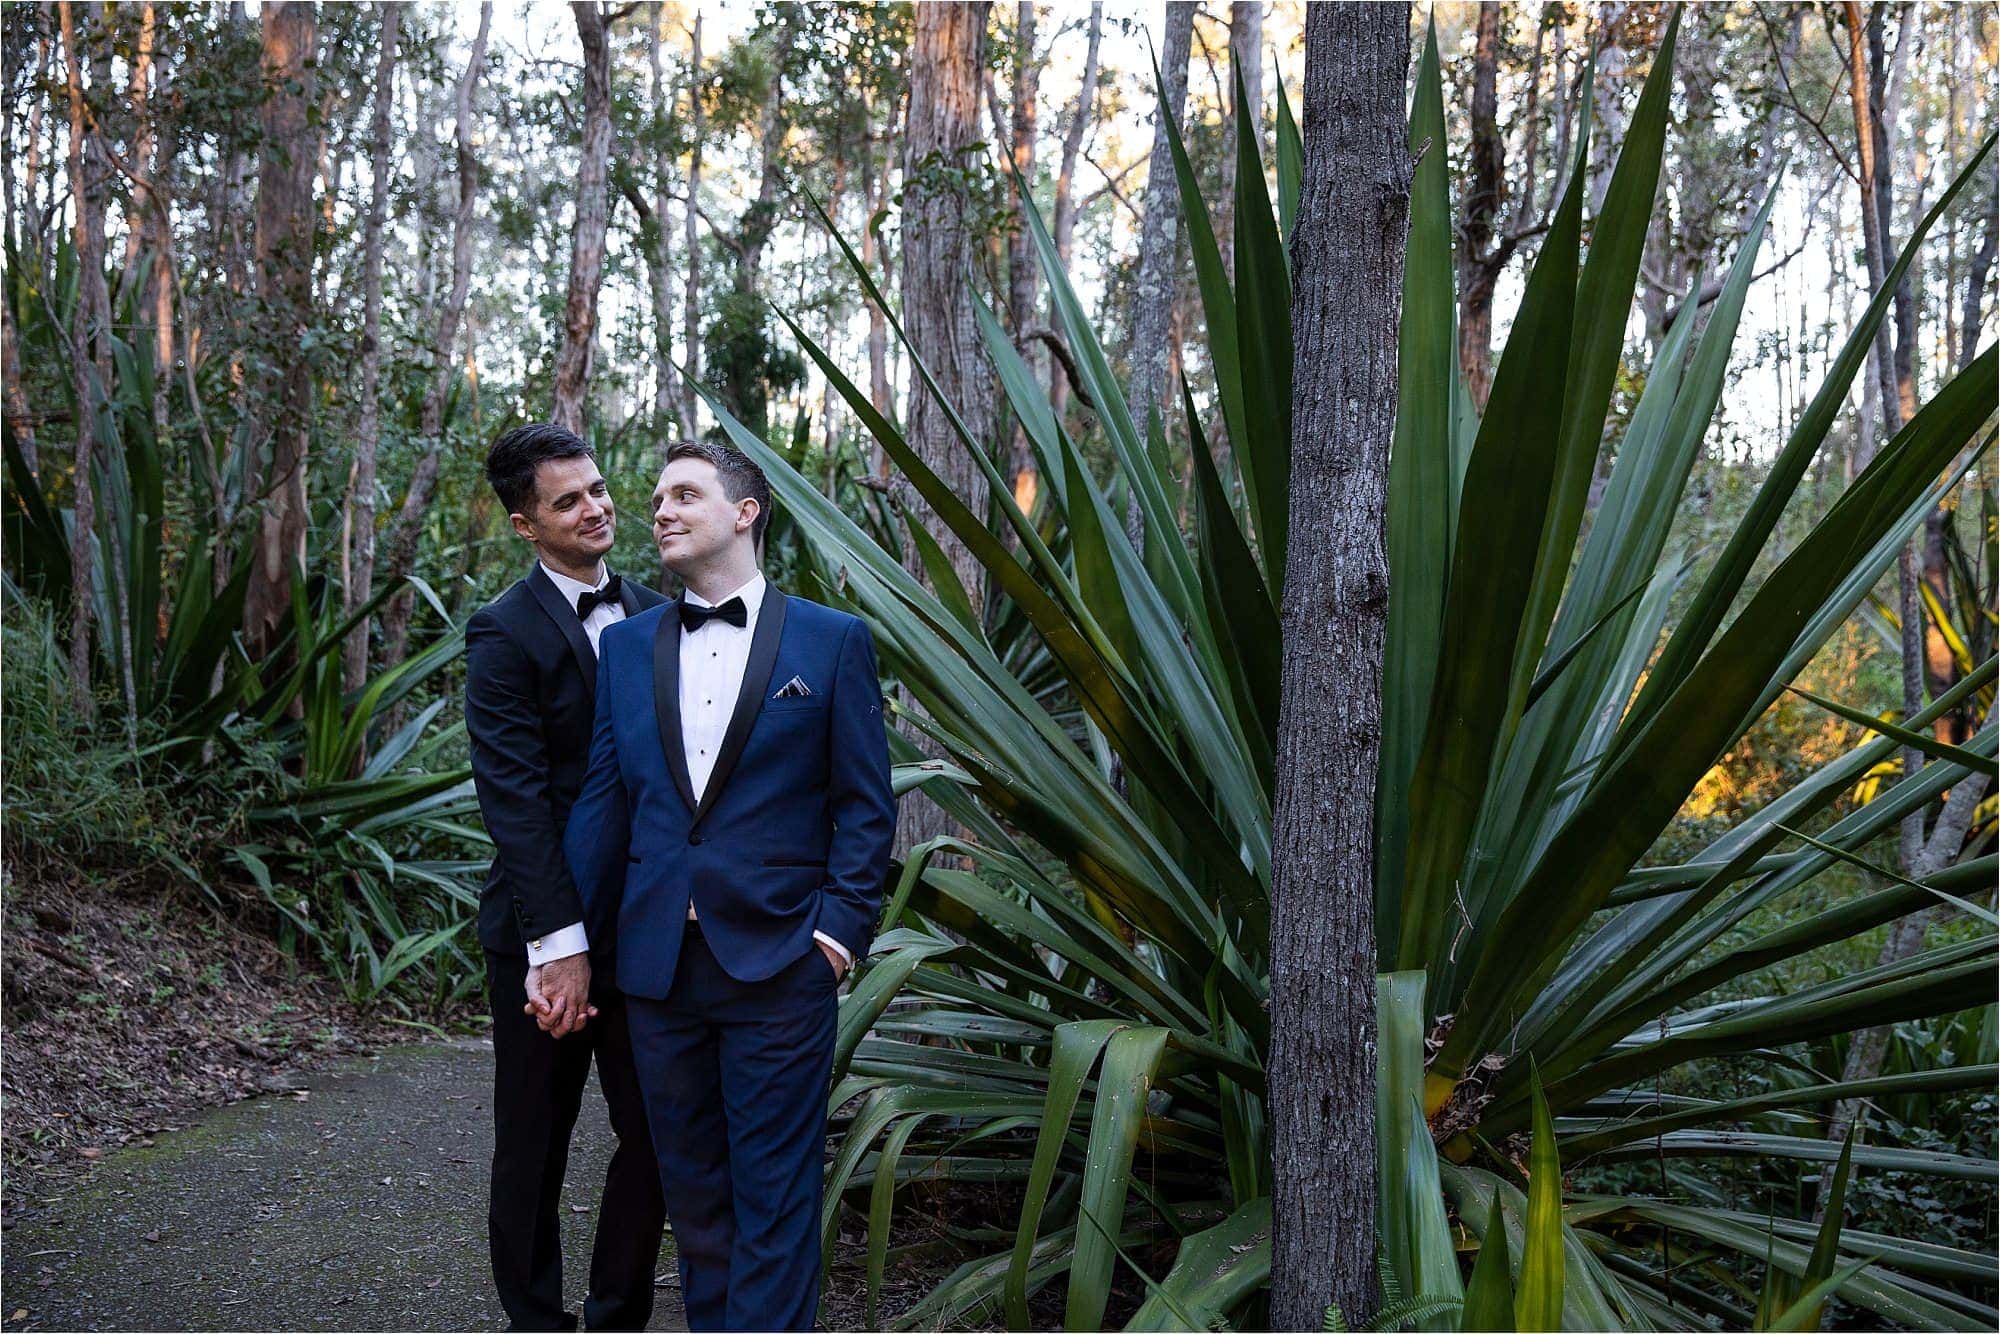 Same sex wedding photography at Walkabout Creek, by Mooi Photography.